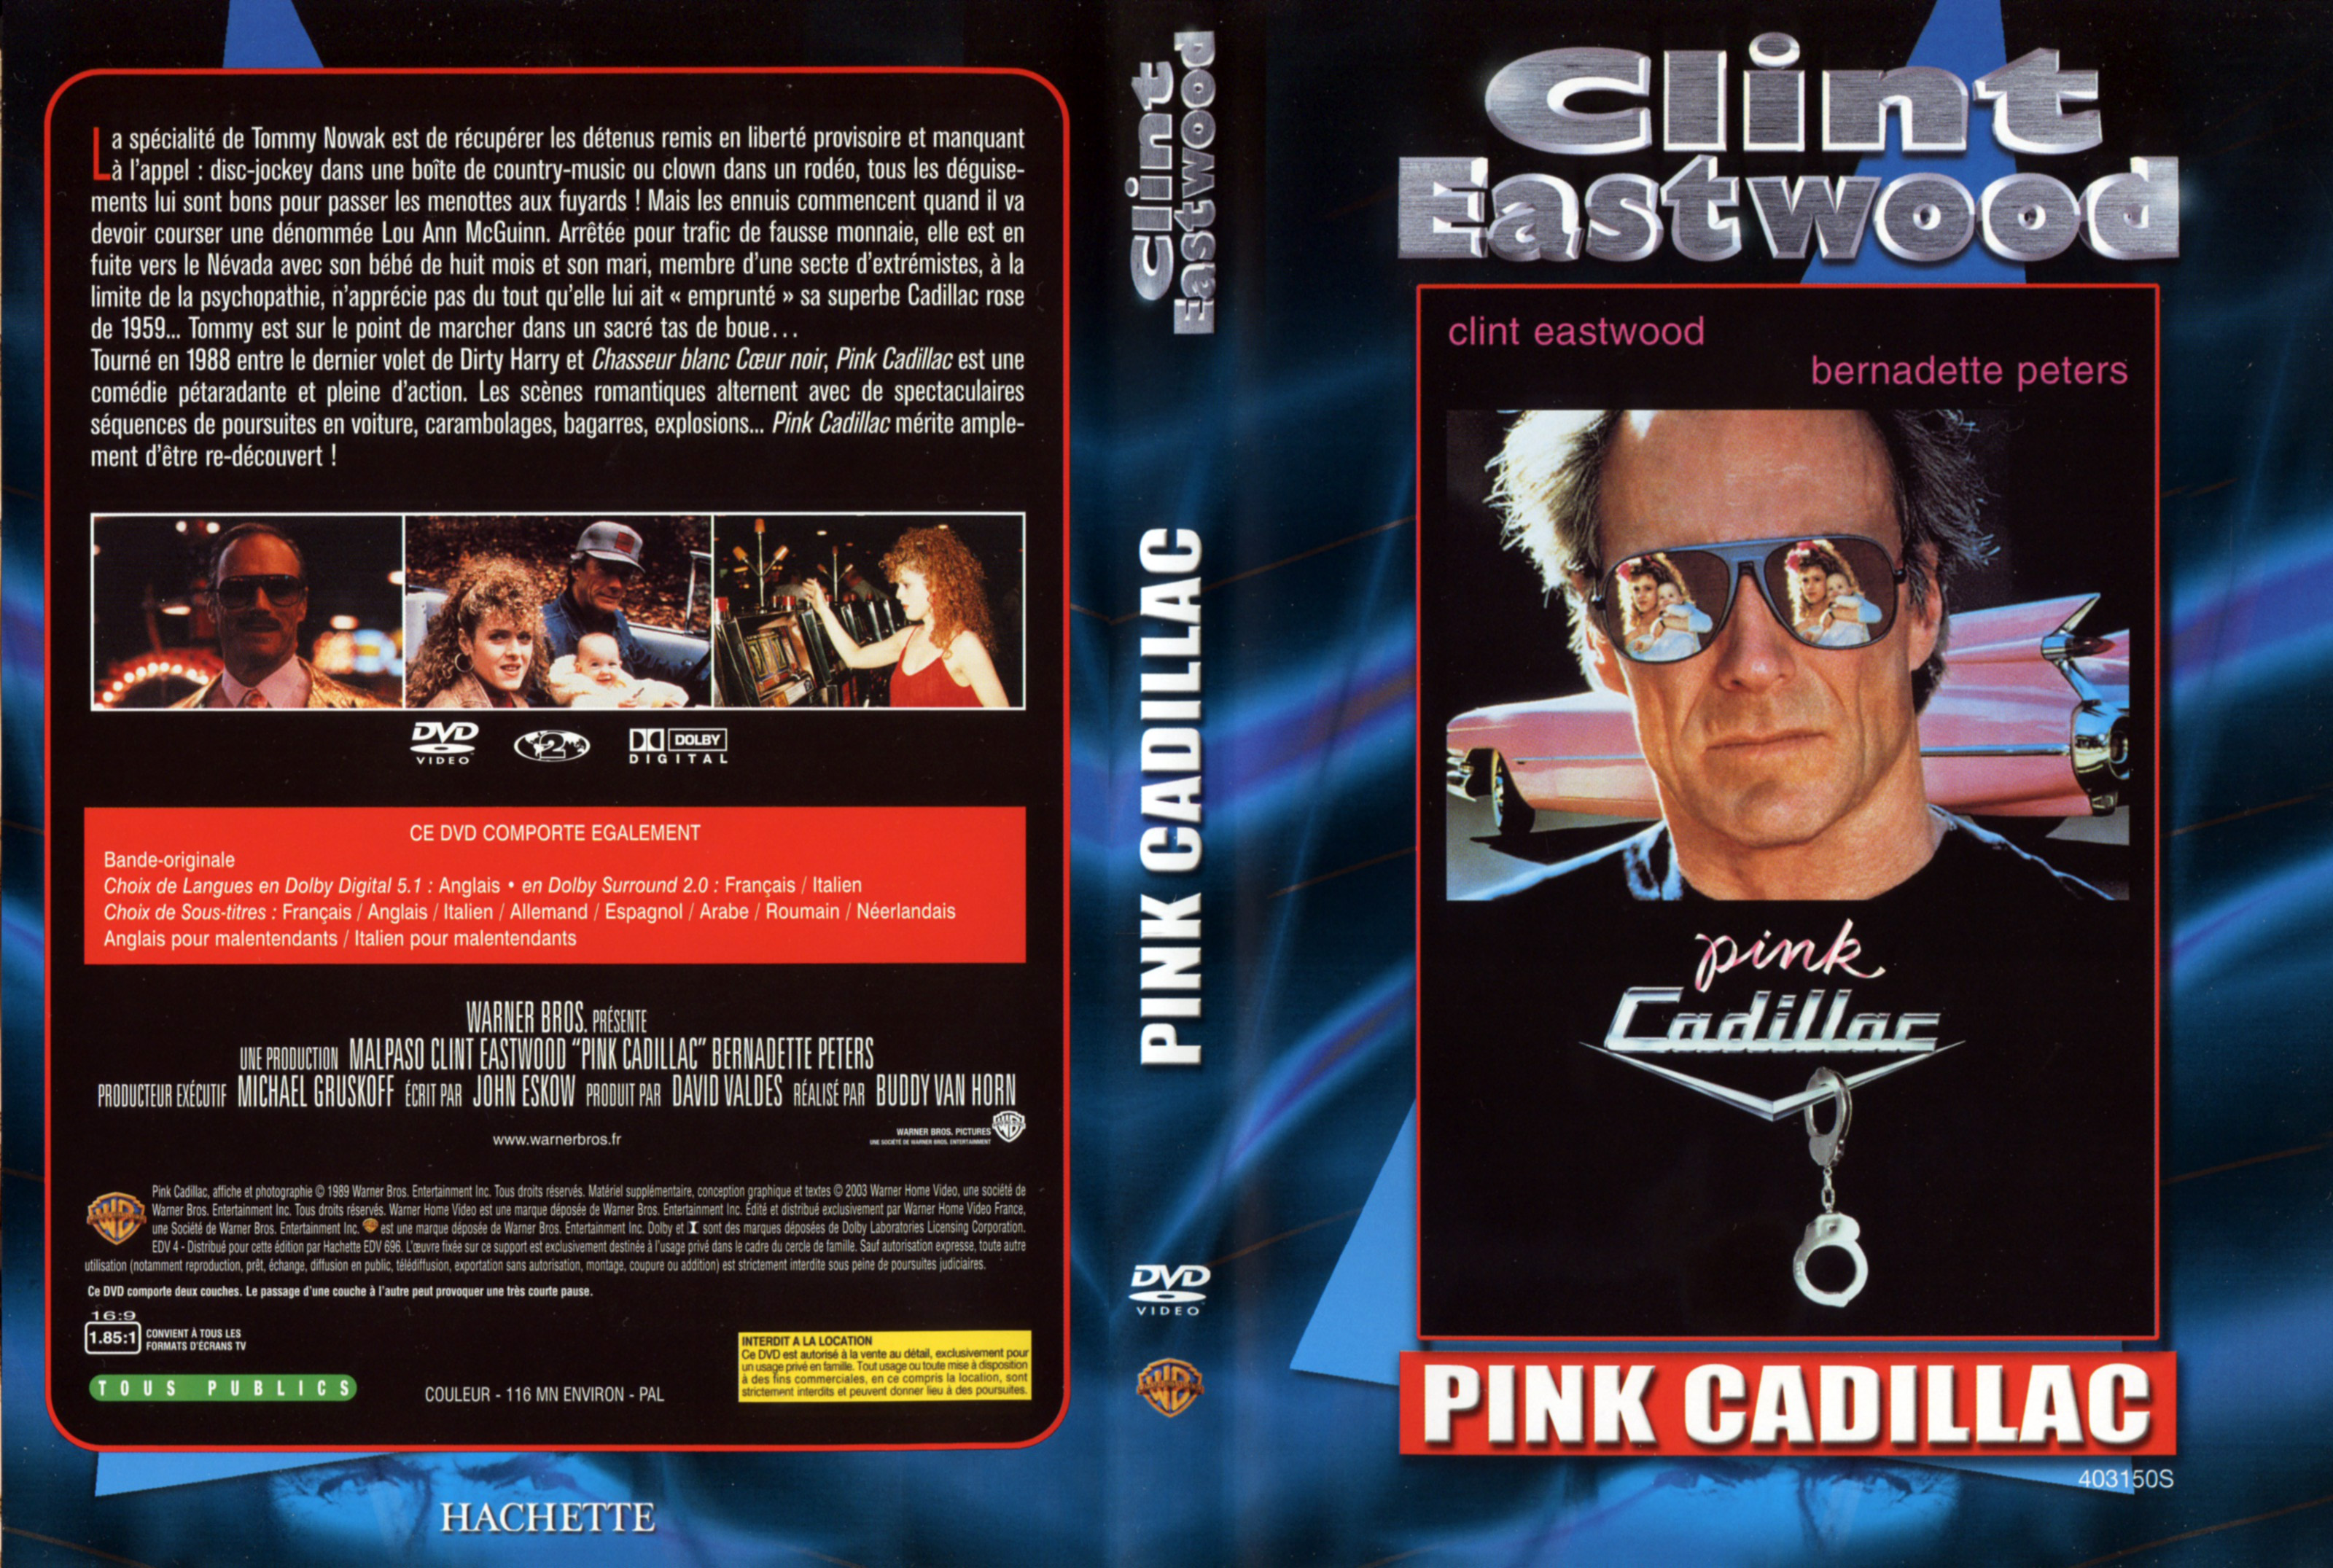 Jaquette DVD Pink Cadillac v2